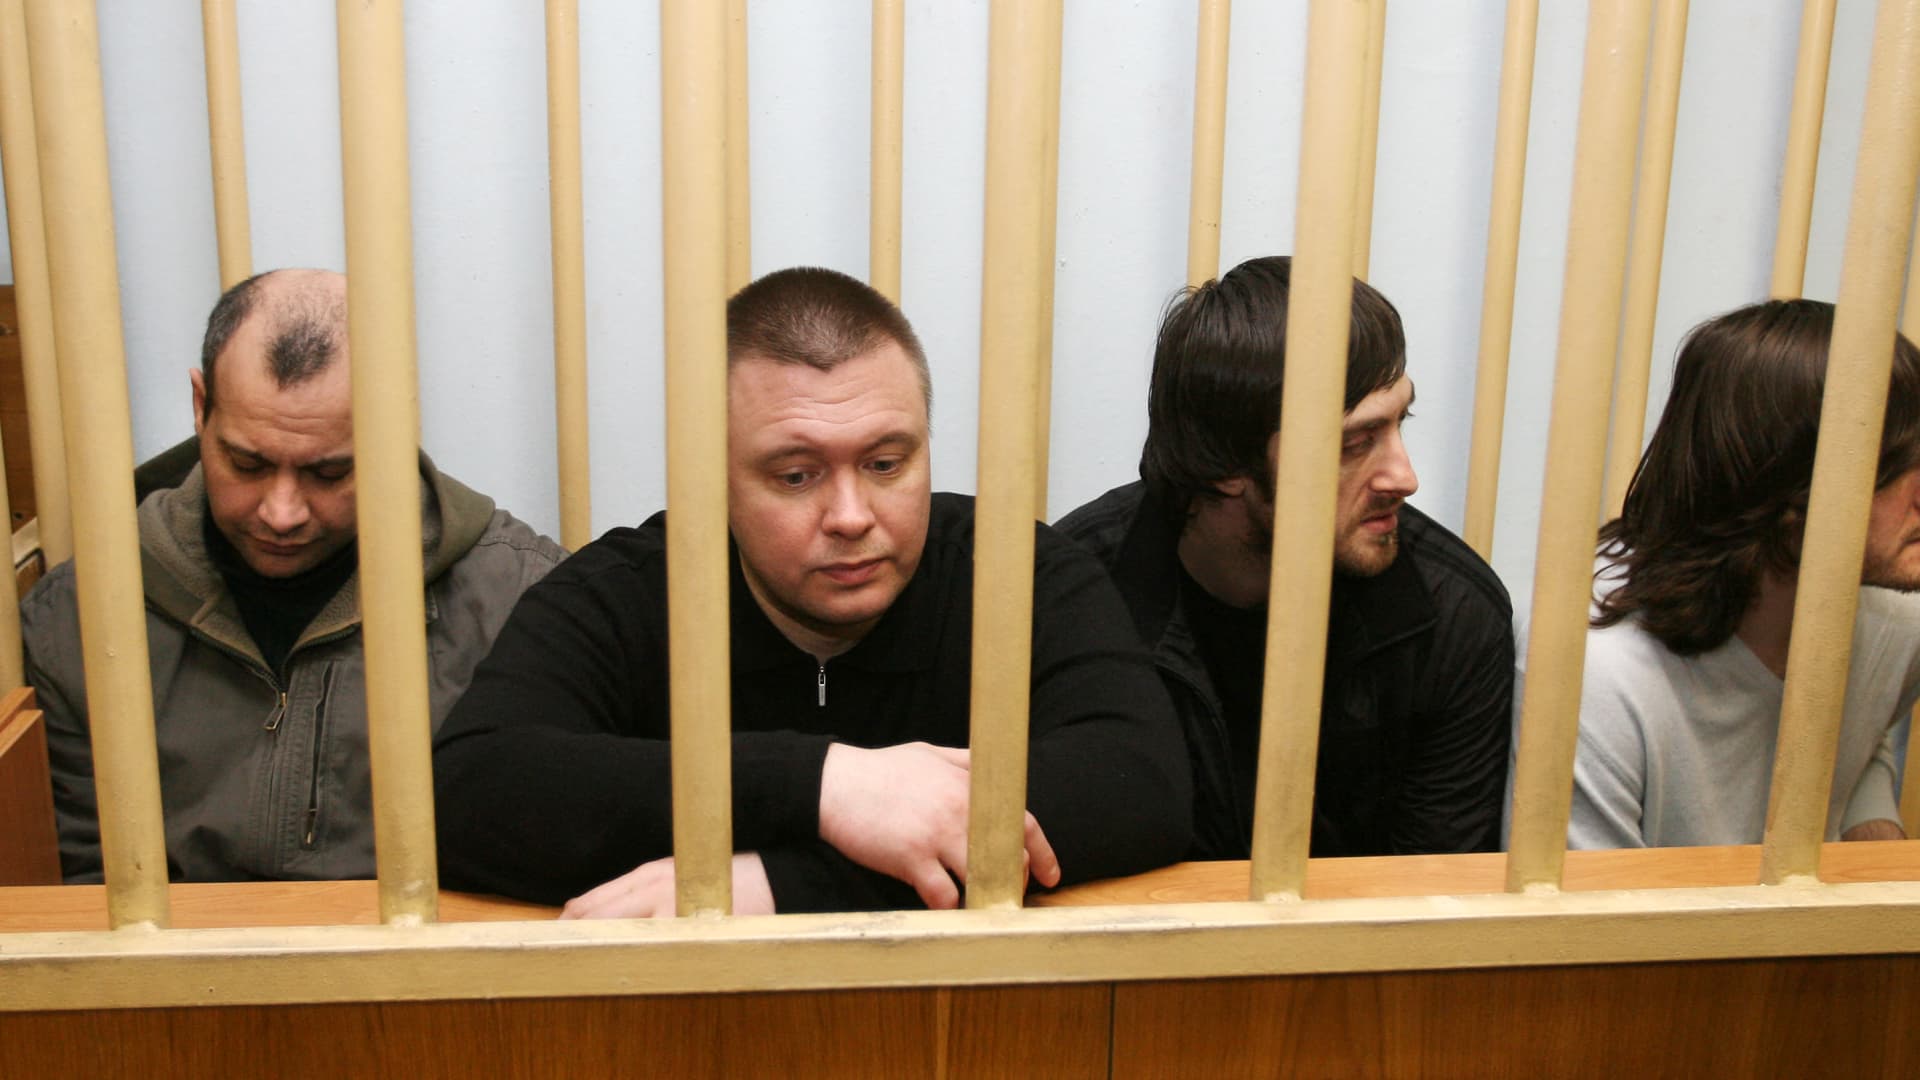 The four suspects in the murder case of Russian investigative journalist Anna Politkovskaya, from left, Sergei Khadzhikurbanov, Pavel Ryaguzov, Ibragim Makhmudov and Dzhabrail Makhmudov sit inside the defendants' cage at a Moscow court on February 18, 2009. The jury in the trial of the 2006 murder of Politkovskaya will retire on February 19 to consider a verdict against the accused, the judge said.AFP PHOTO / ALEXEY SAZONOV (Photo by Alexey SAZONOV / AFP) (Photo by ALEXEY SAZONOV/AFP via Getty Images)